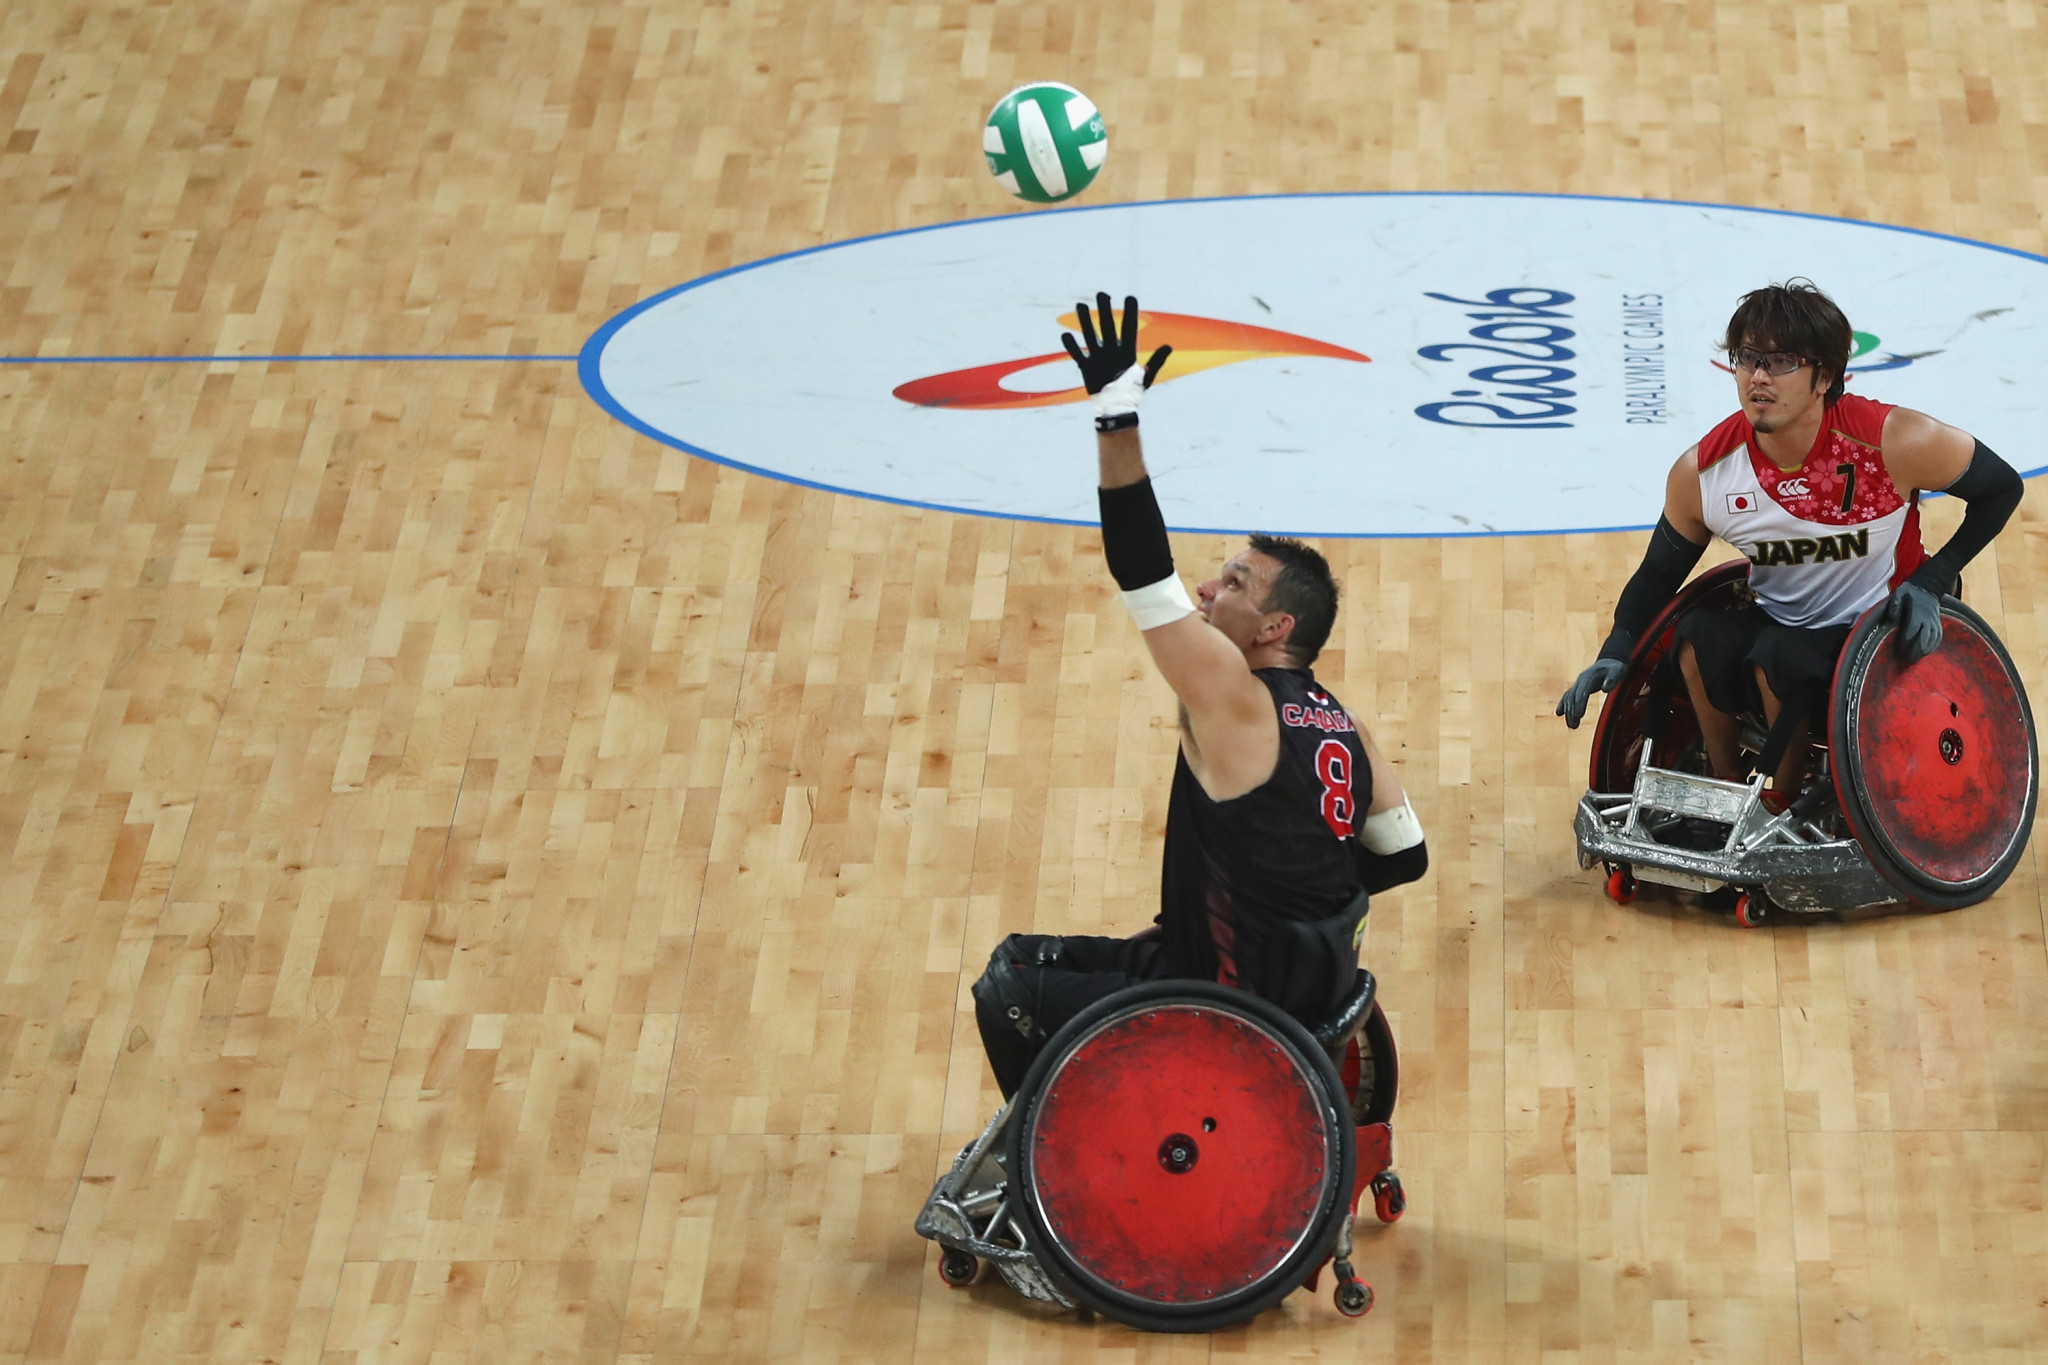 Hosts Canada will be aiming to qualify, after placing fourth at the Rio 2016 Paralympics ©Getty Images